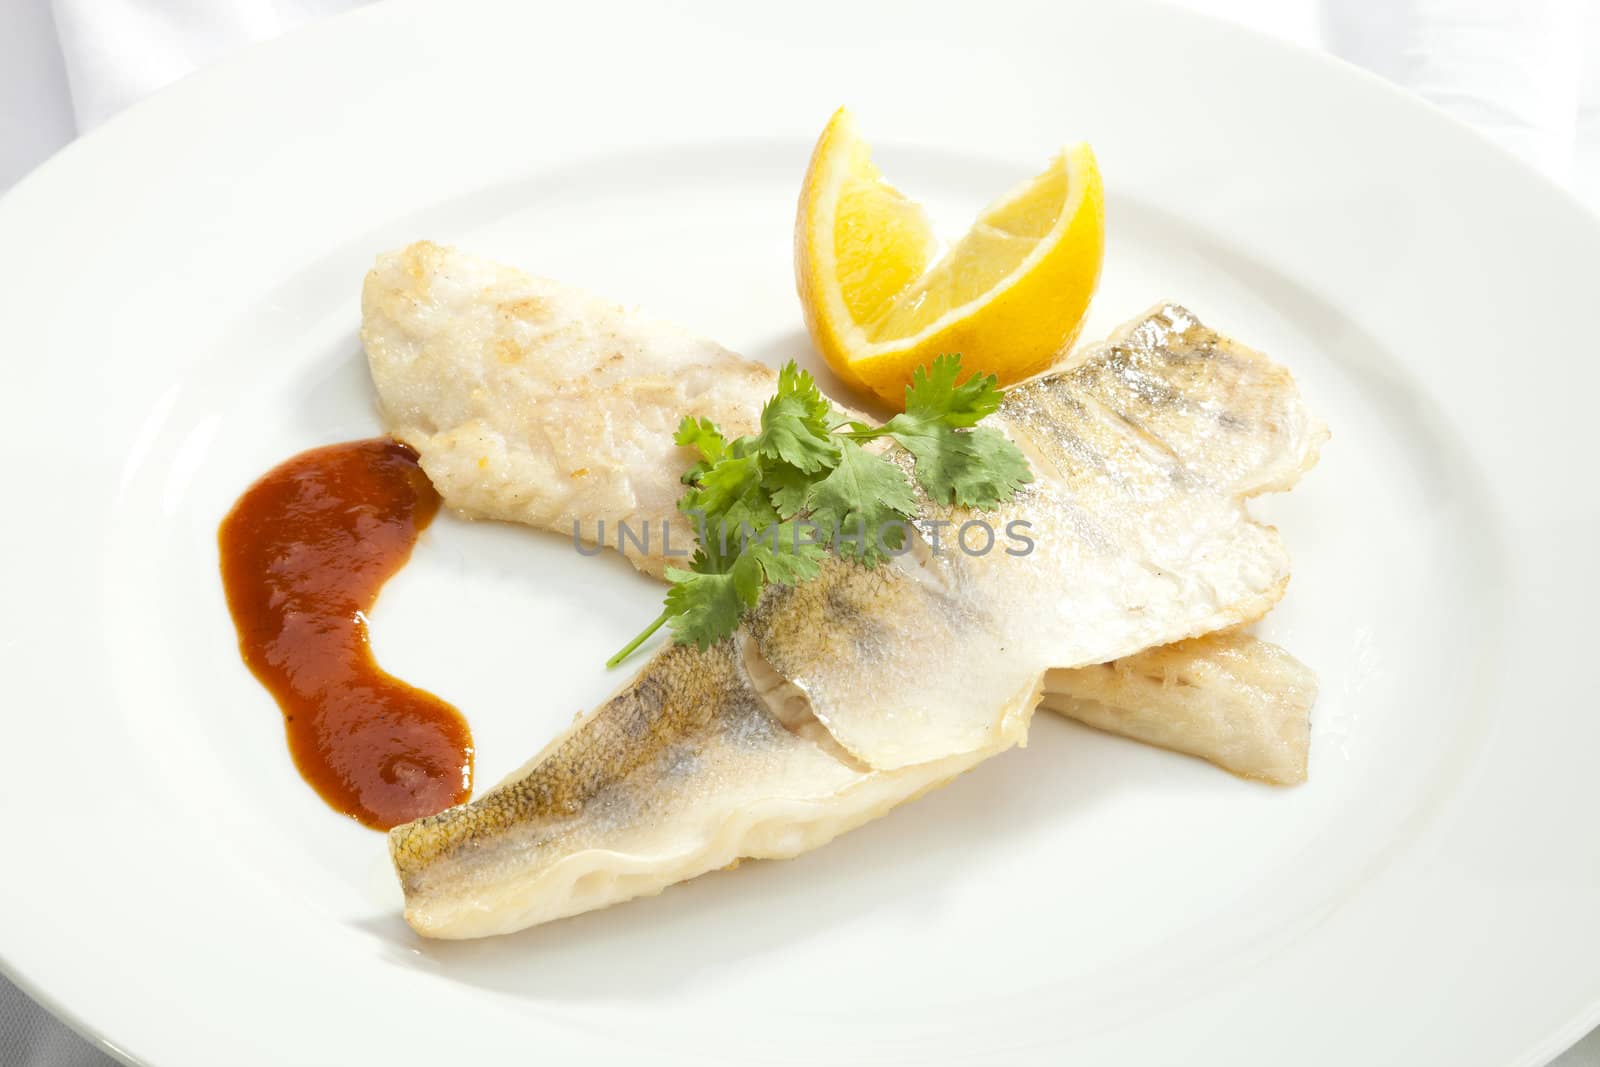 Grilled Pikeperch with lemon by hanusst